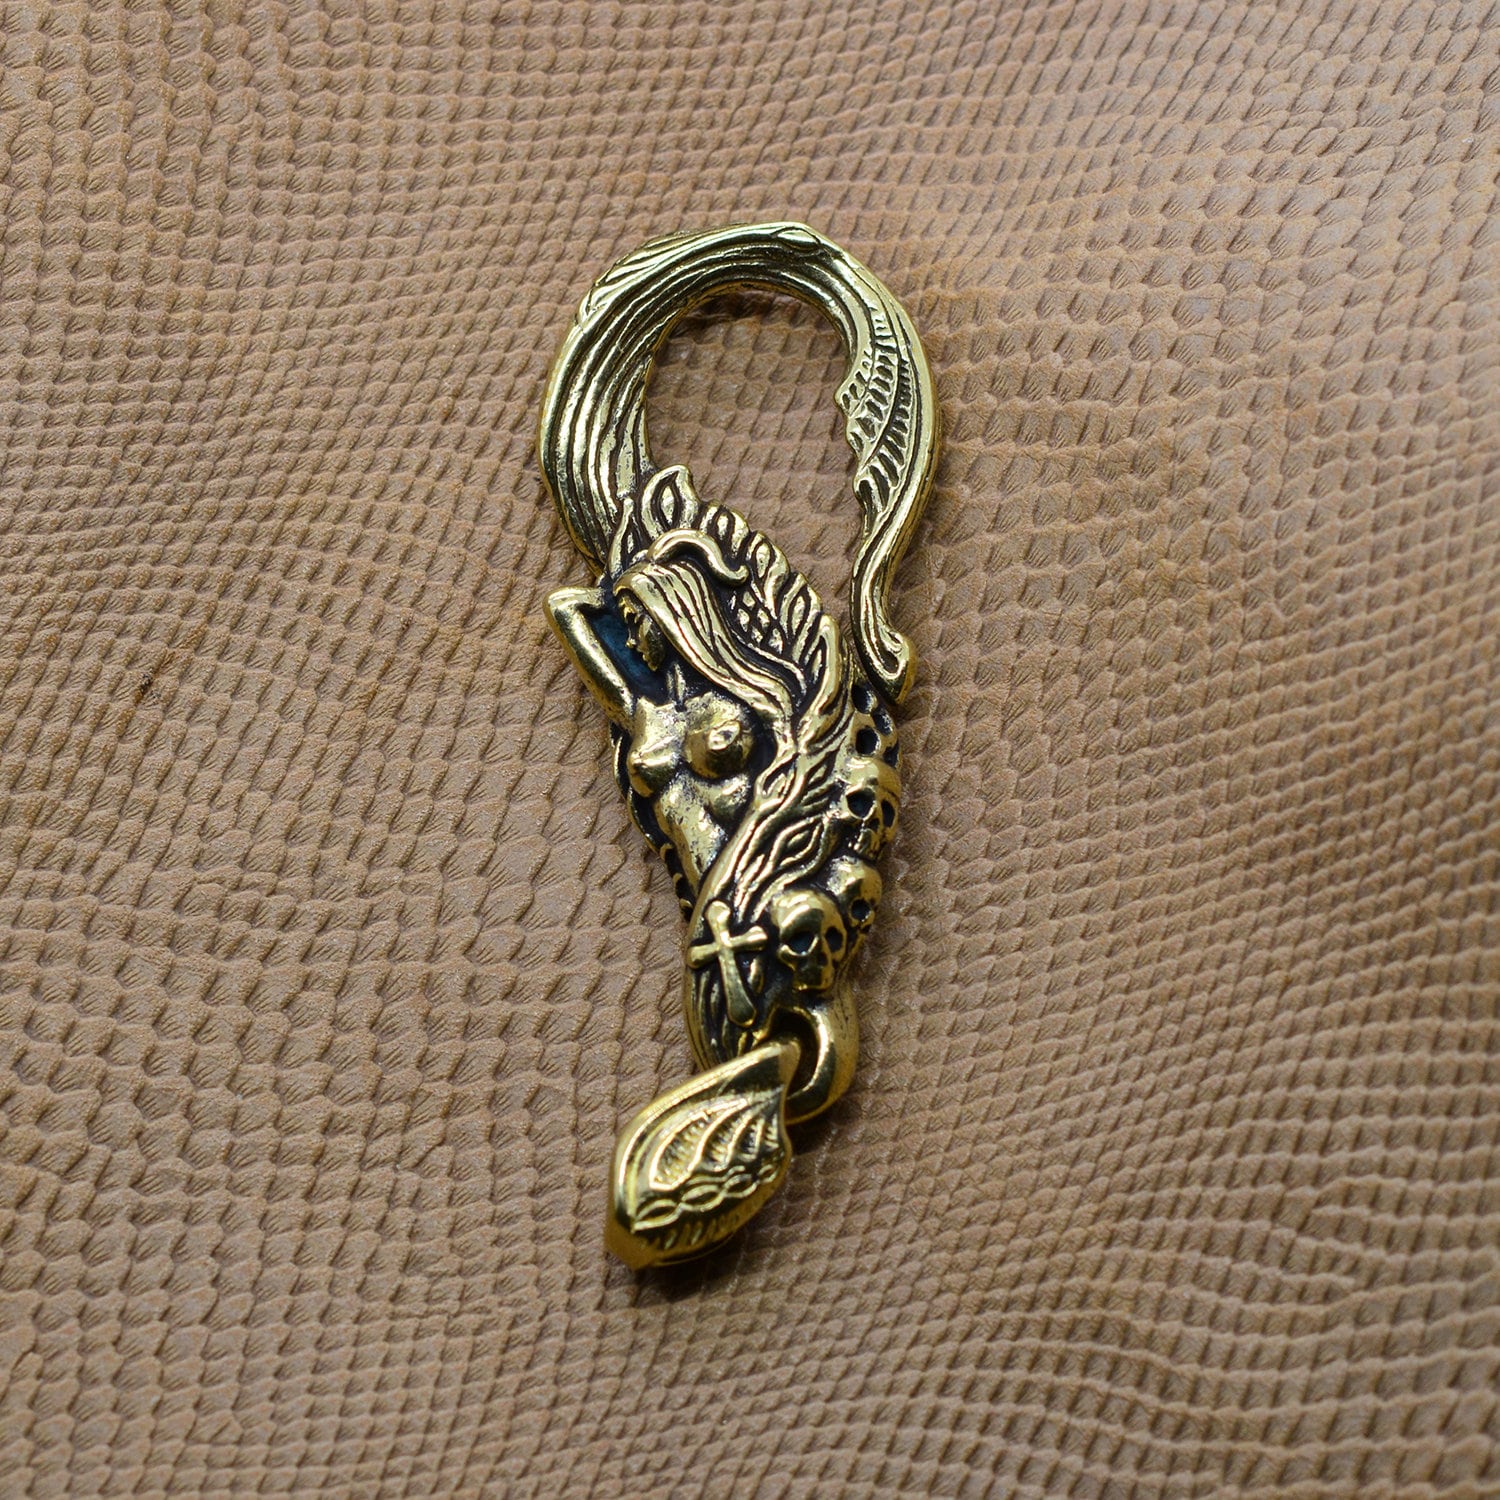 Wholesale Swivel Trigger Snap Hooks Keychain Key Ring Bronze/gold/silver Key  Ring Key Chain Clasp DIY Making Accessory Supplies 